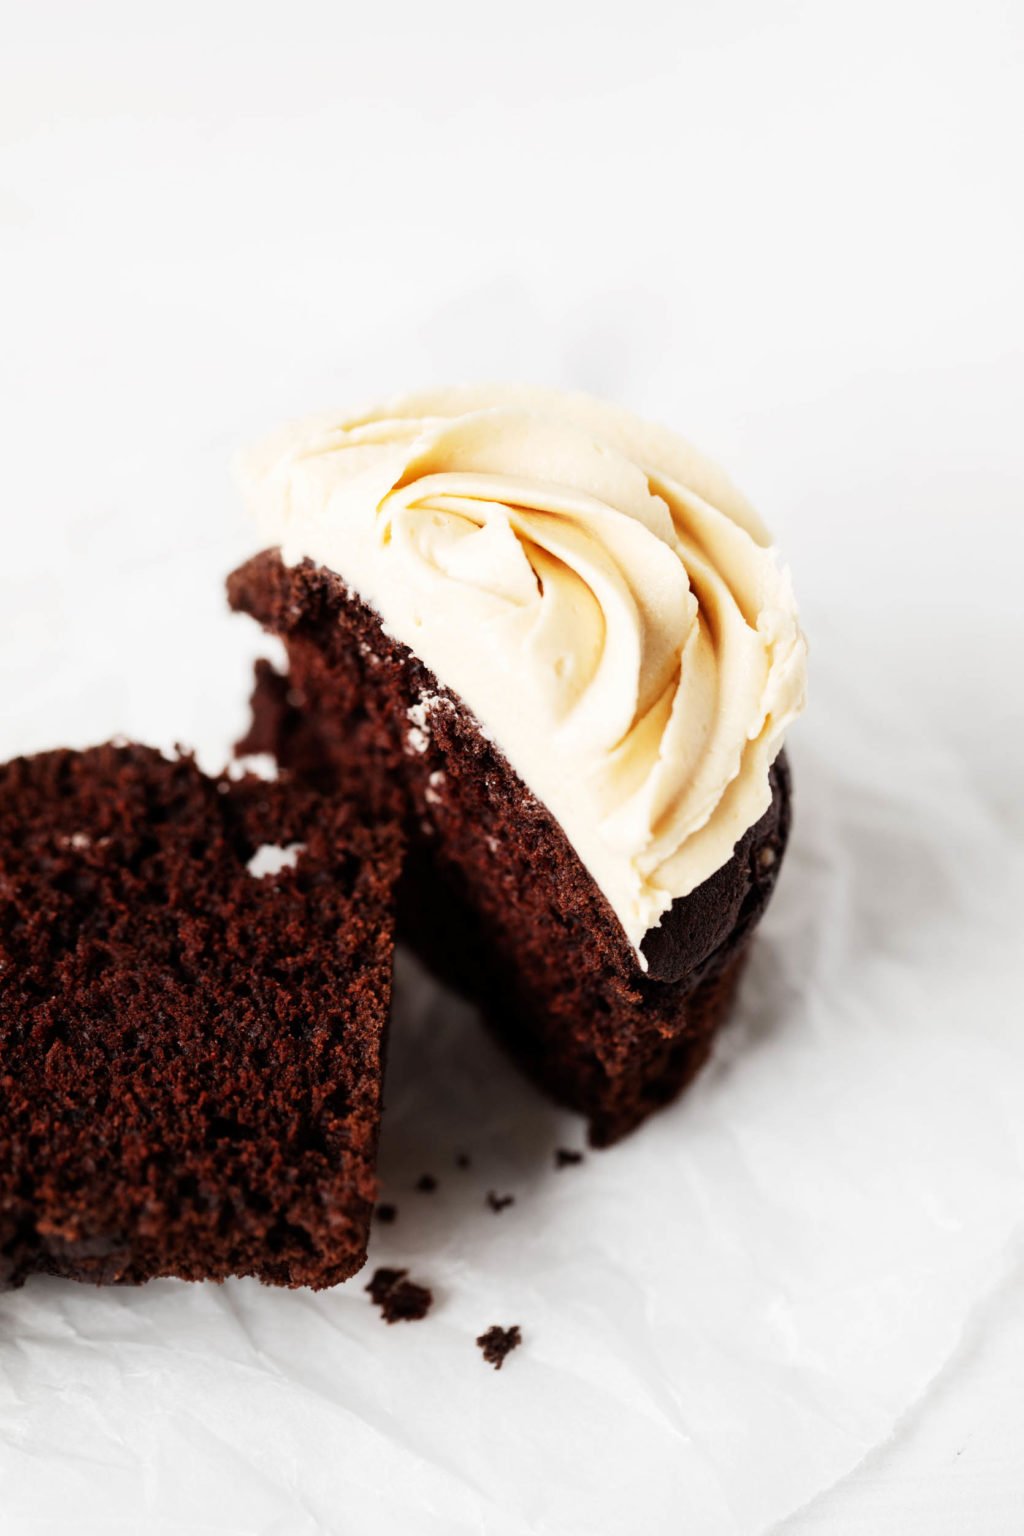 A chocolate peanut butter cupcake has been sliced neatly in half. It's resting on a small dessert plate.